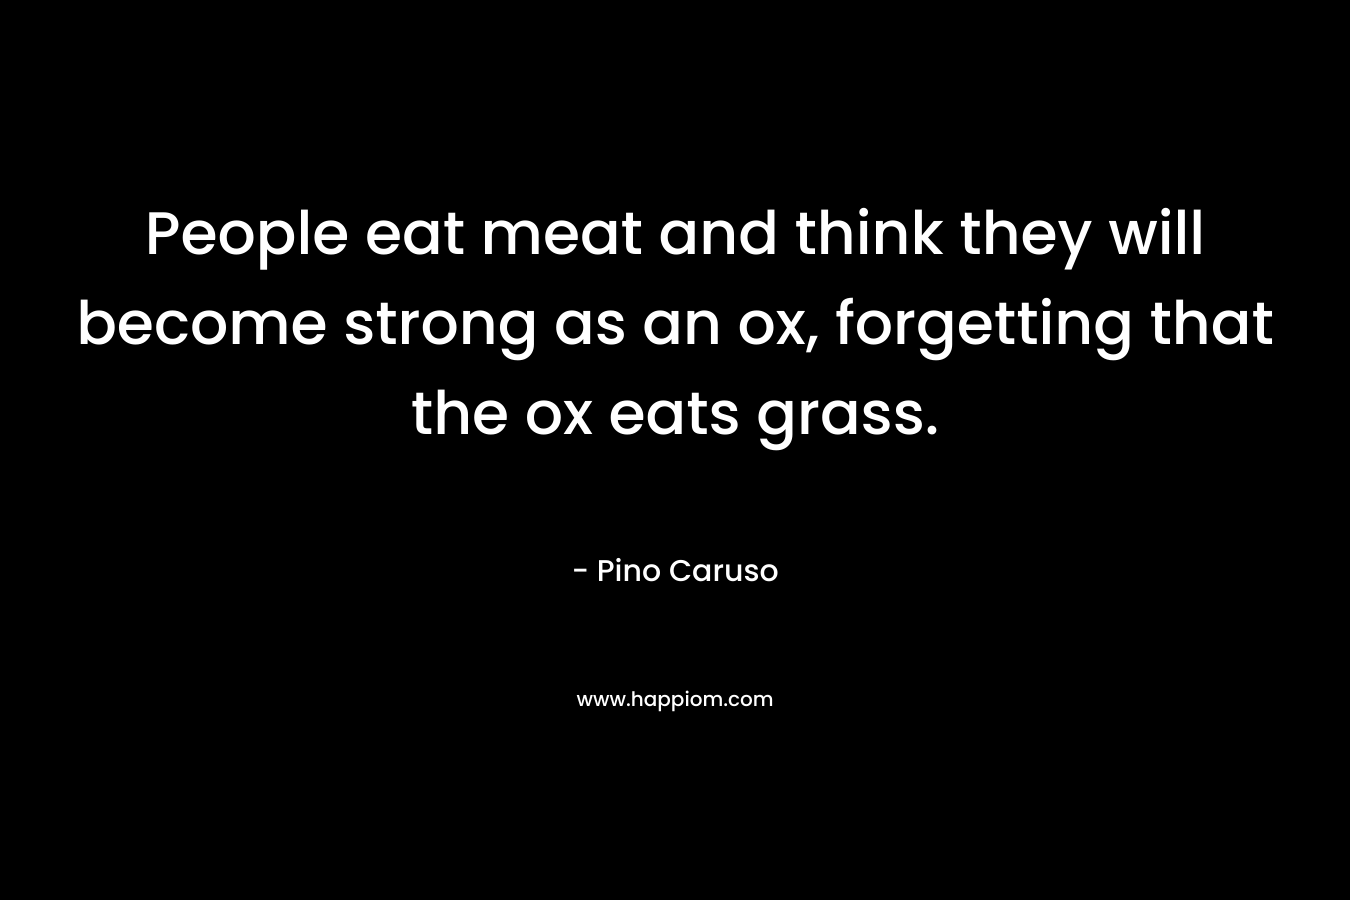 People eat meat and think they will become strong as an ox, forgetting that the ox eats grass. – Pino Caruso